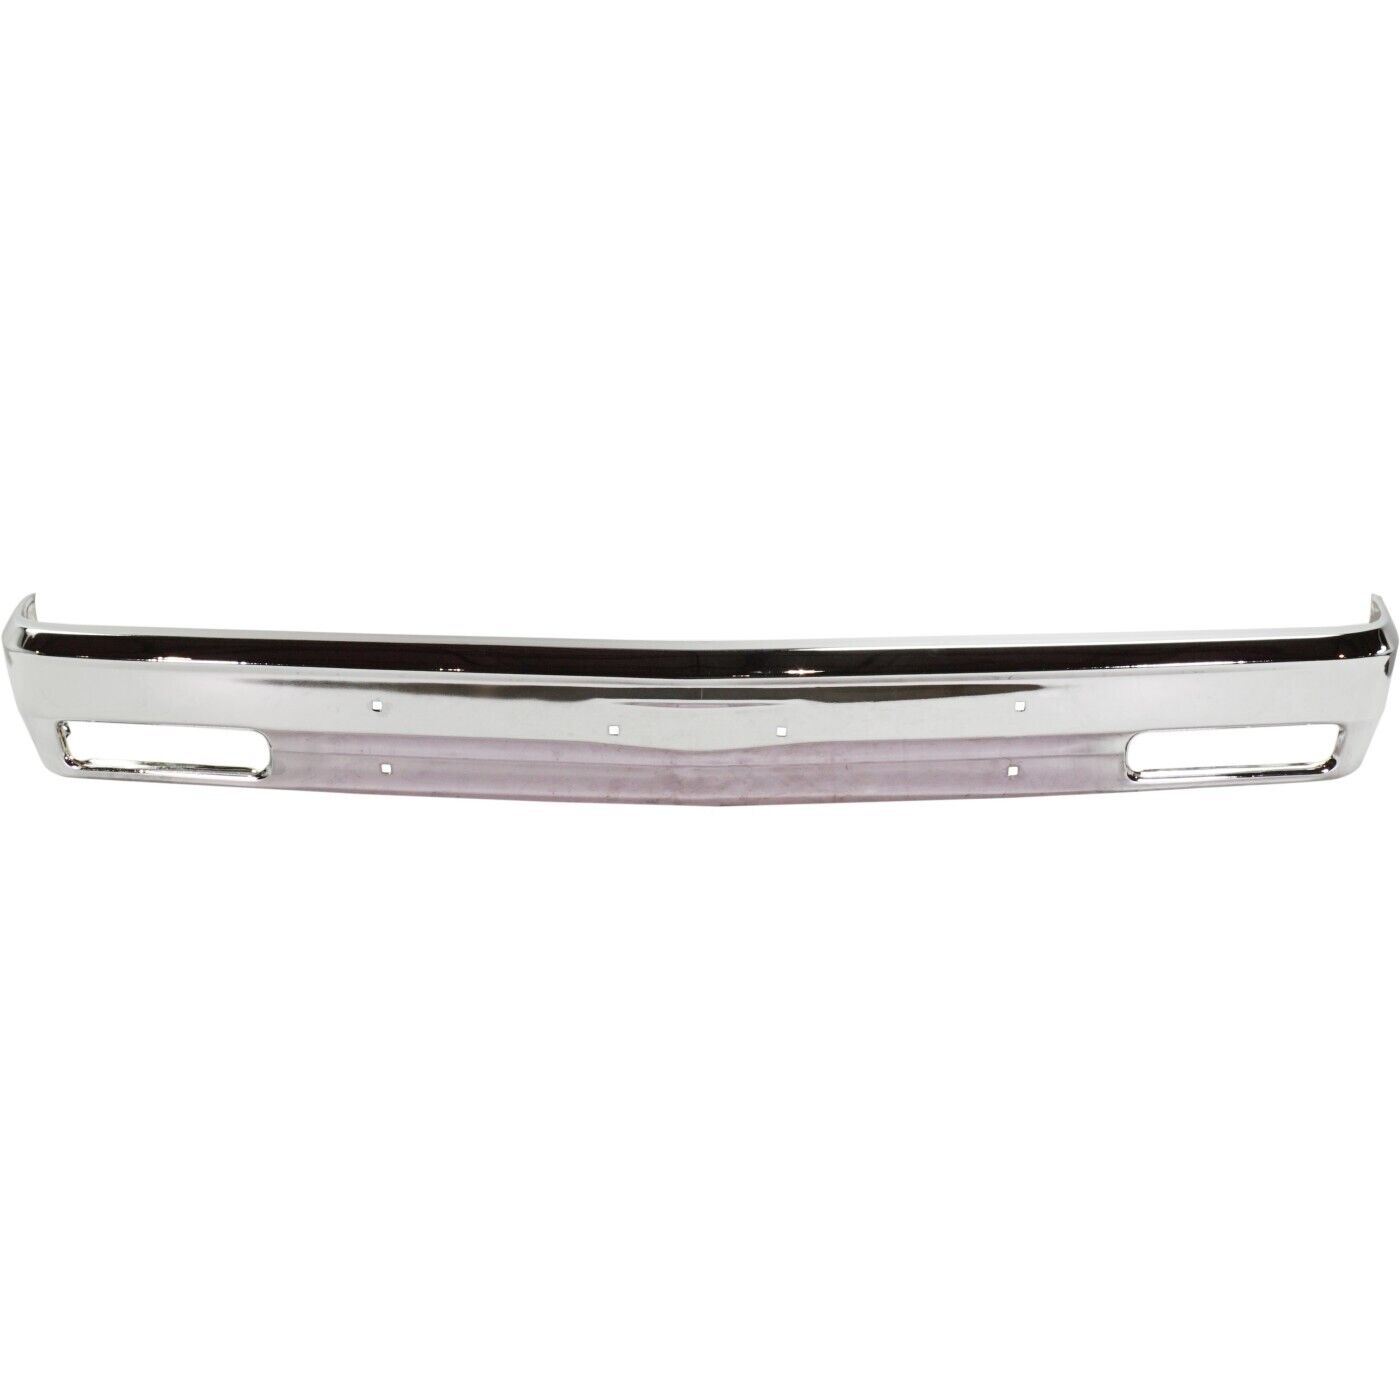 Front Bumper For 1982-1990 Chevy S10 1983-1990 S10 Blazer Chrome Steel 14033726